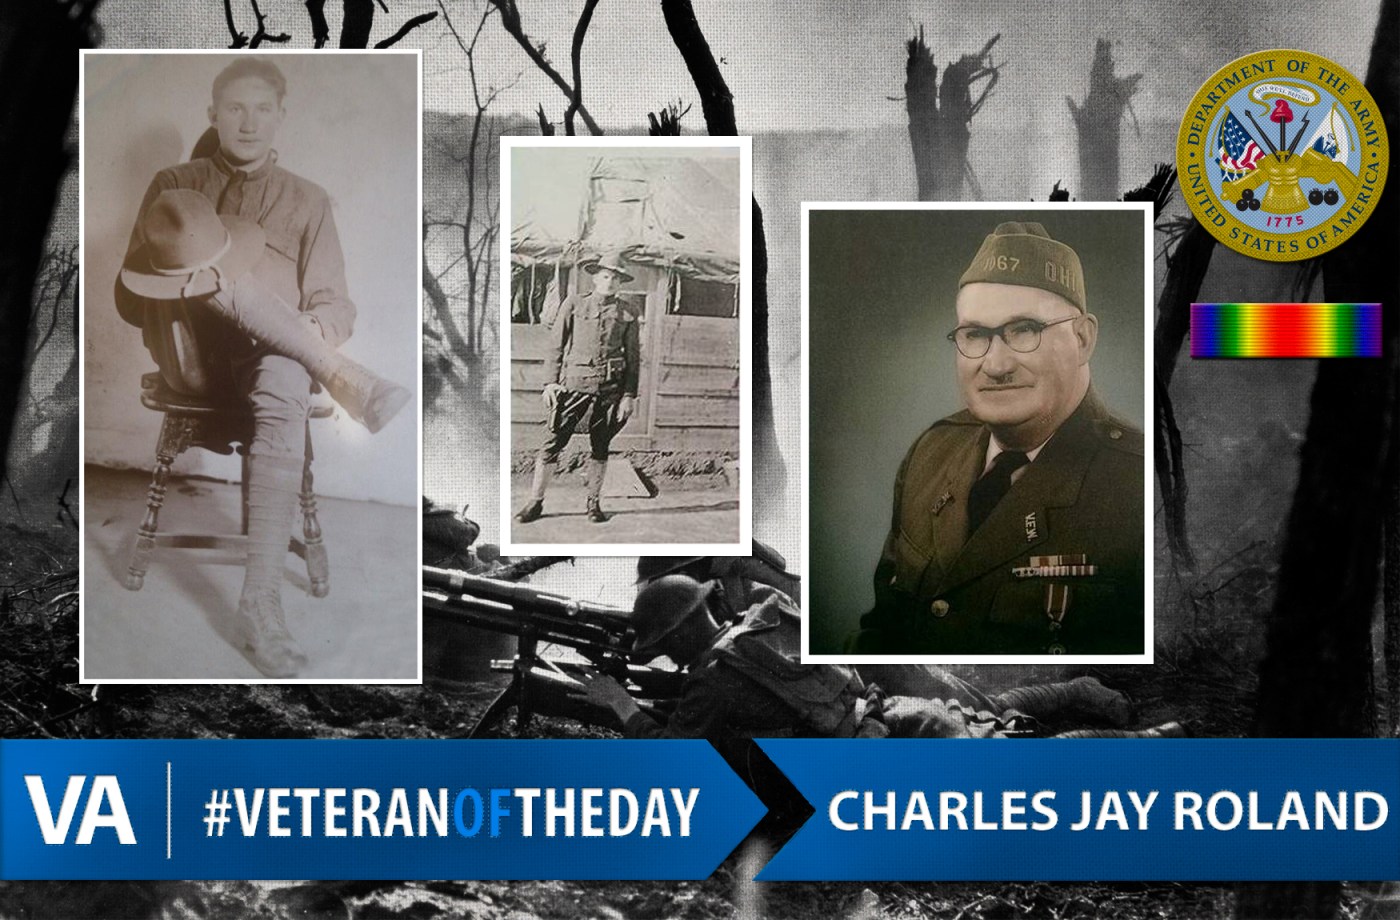 Veteran of the Day Charles Jay Roland